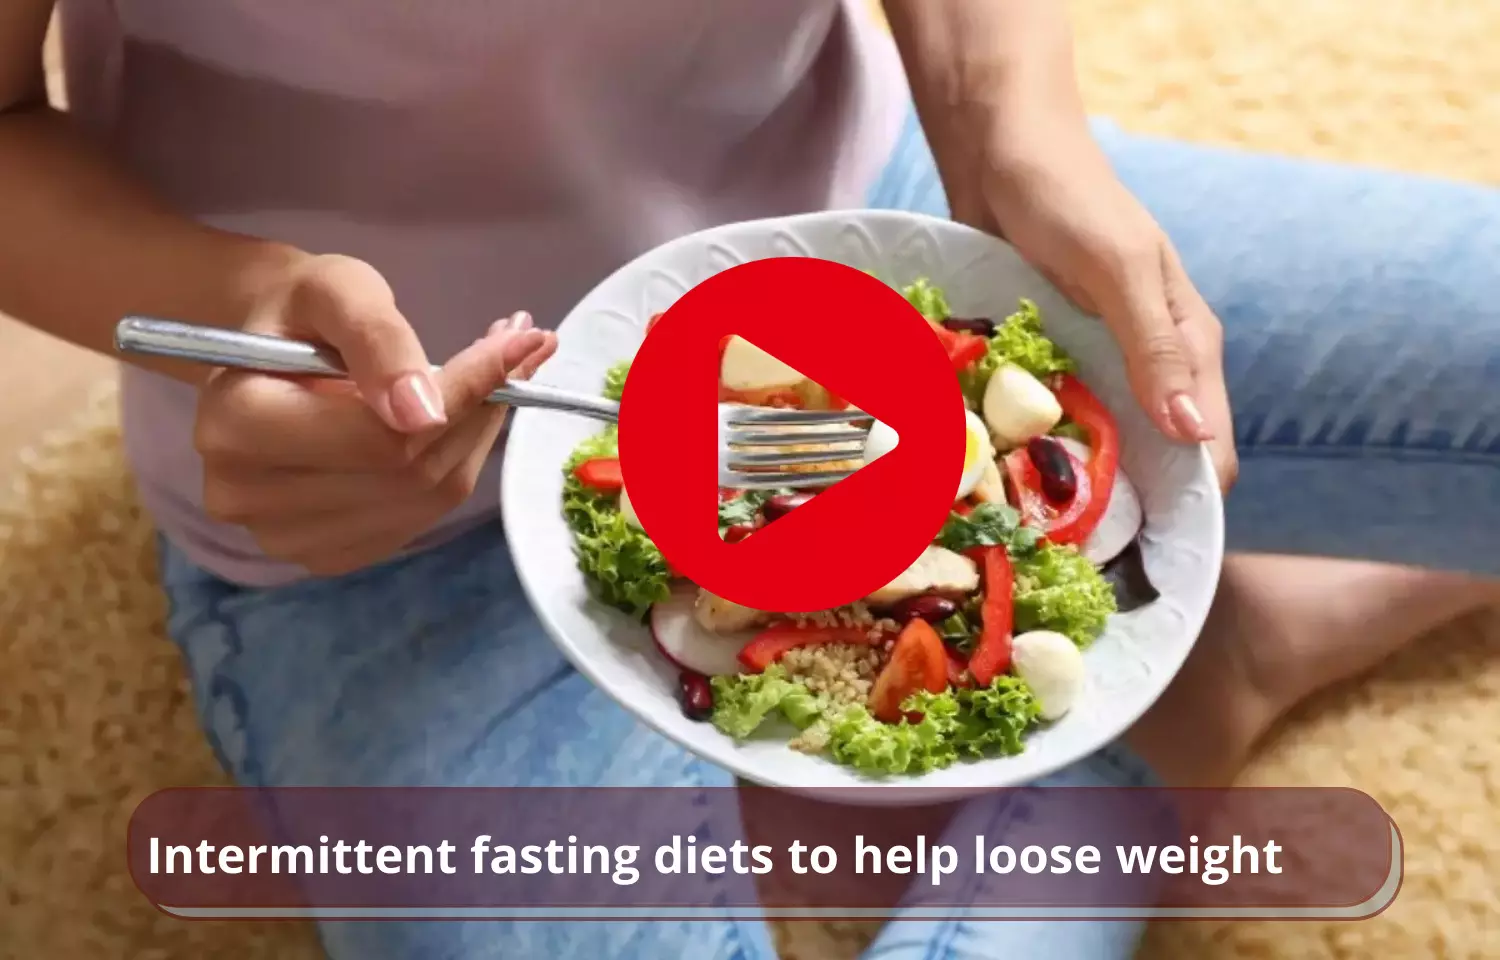 Intermittent fasting diets to help loose weight